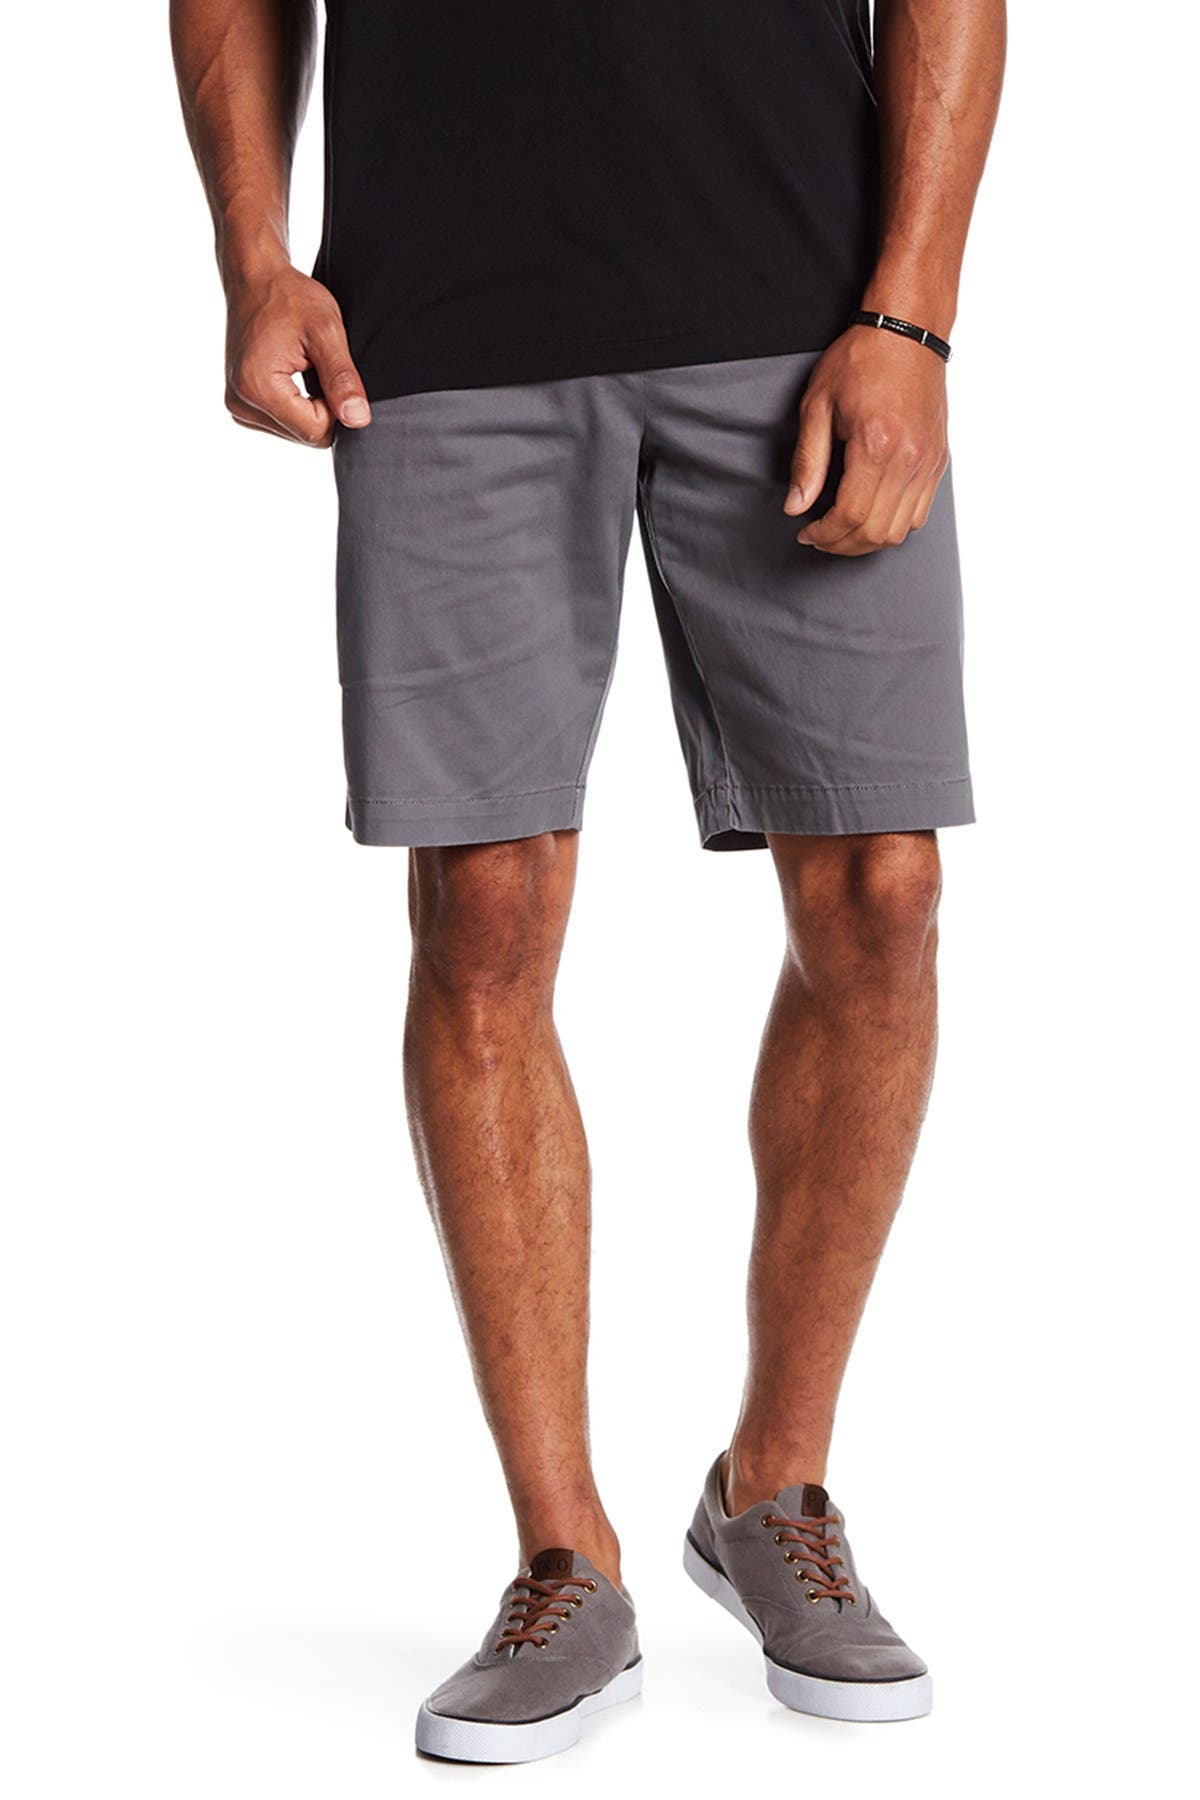 Tommy Bahama Top Sail Shorts In Light/pastel Grey1